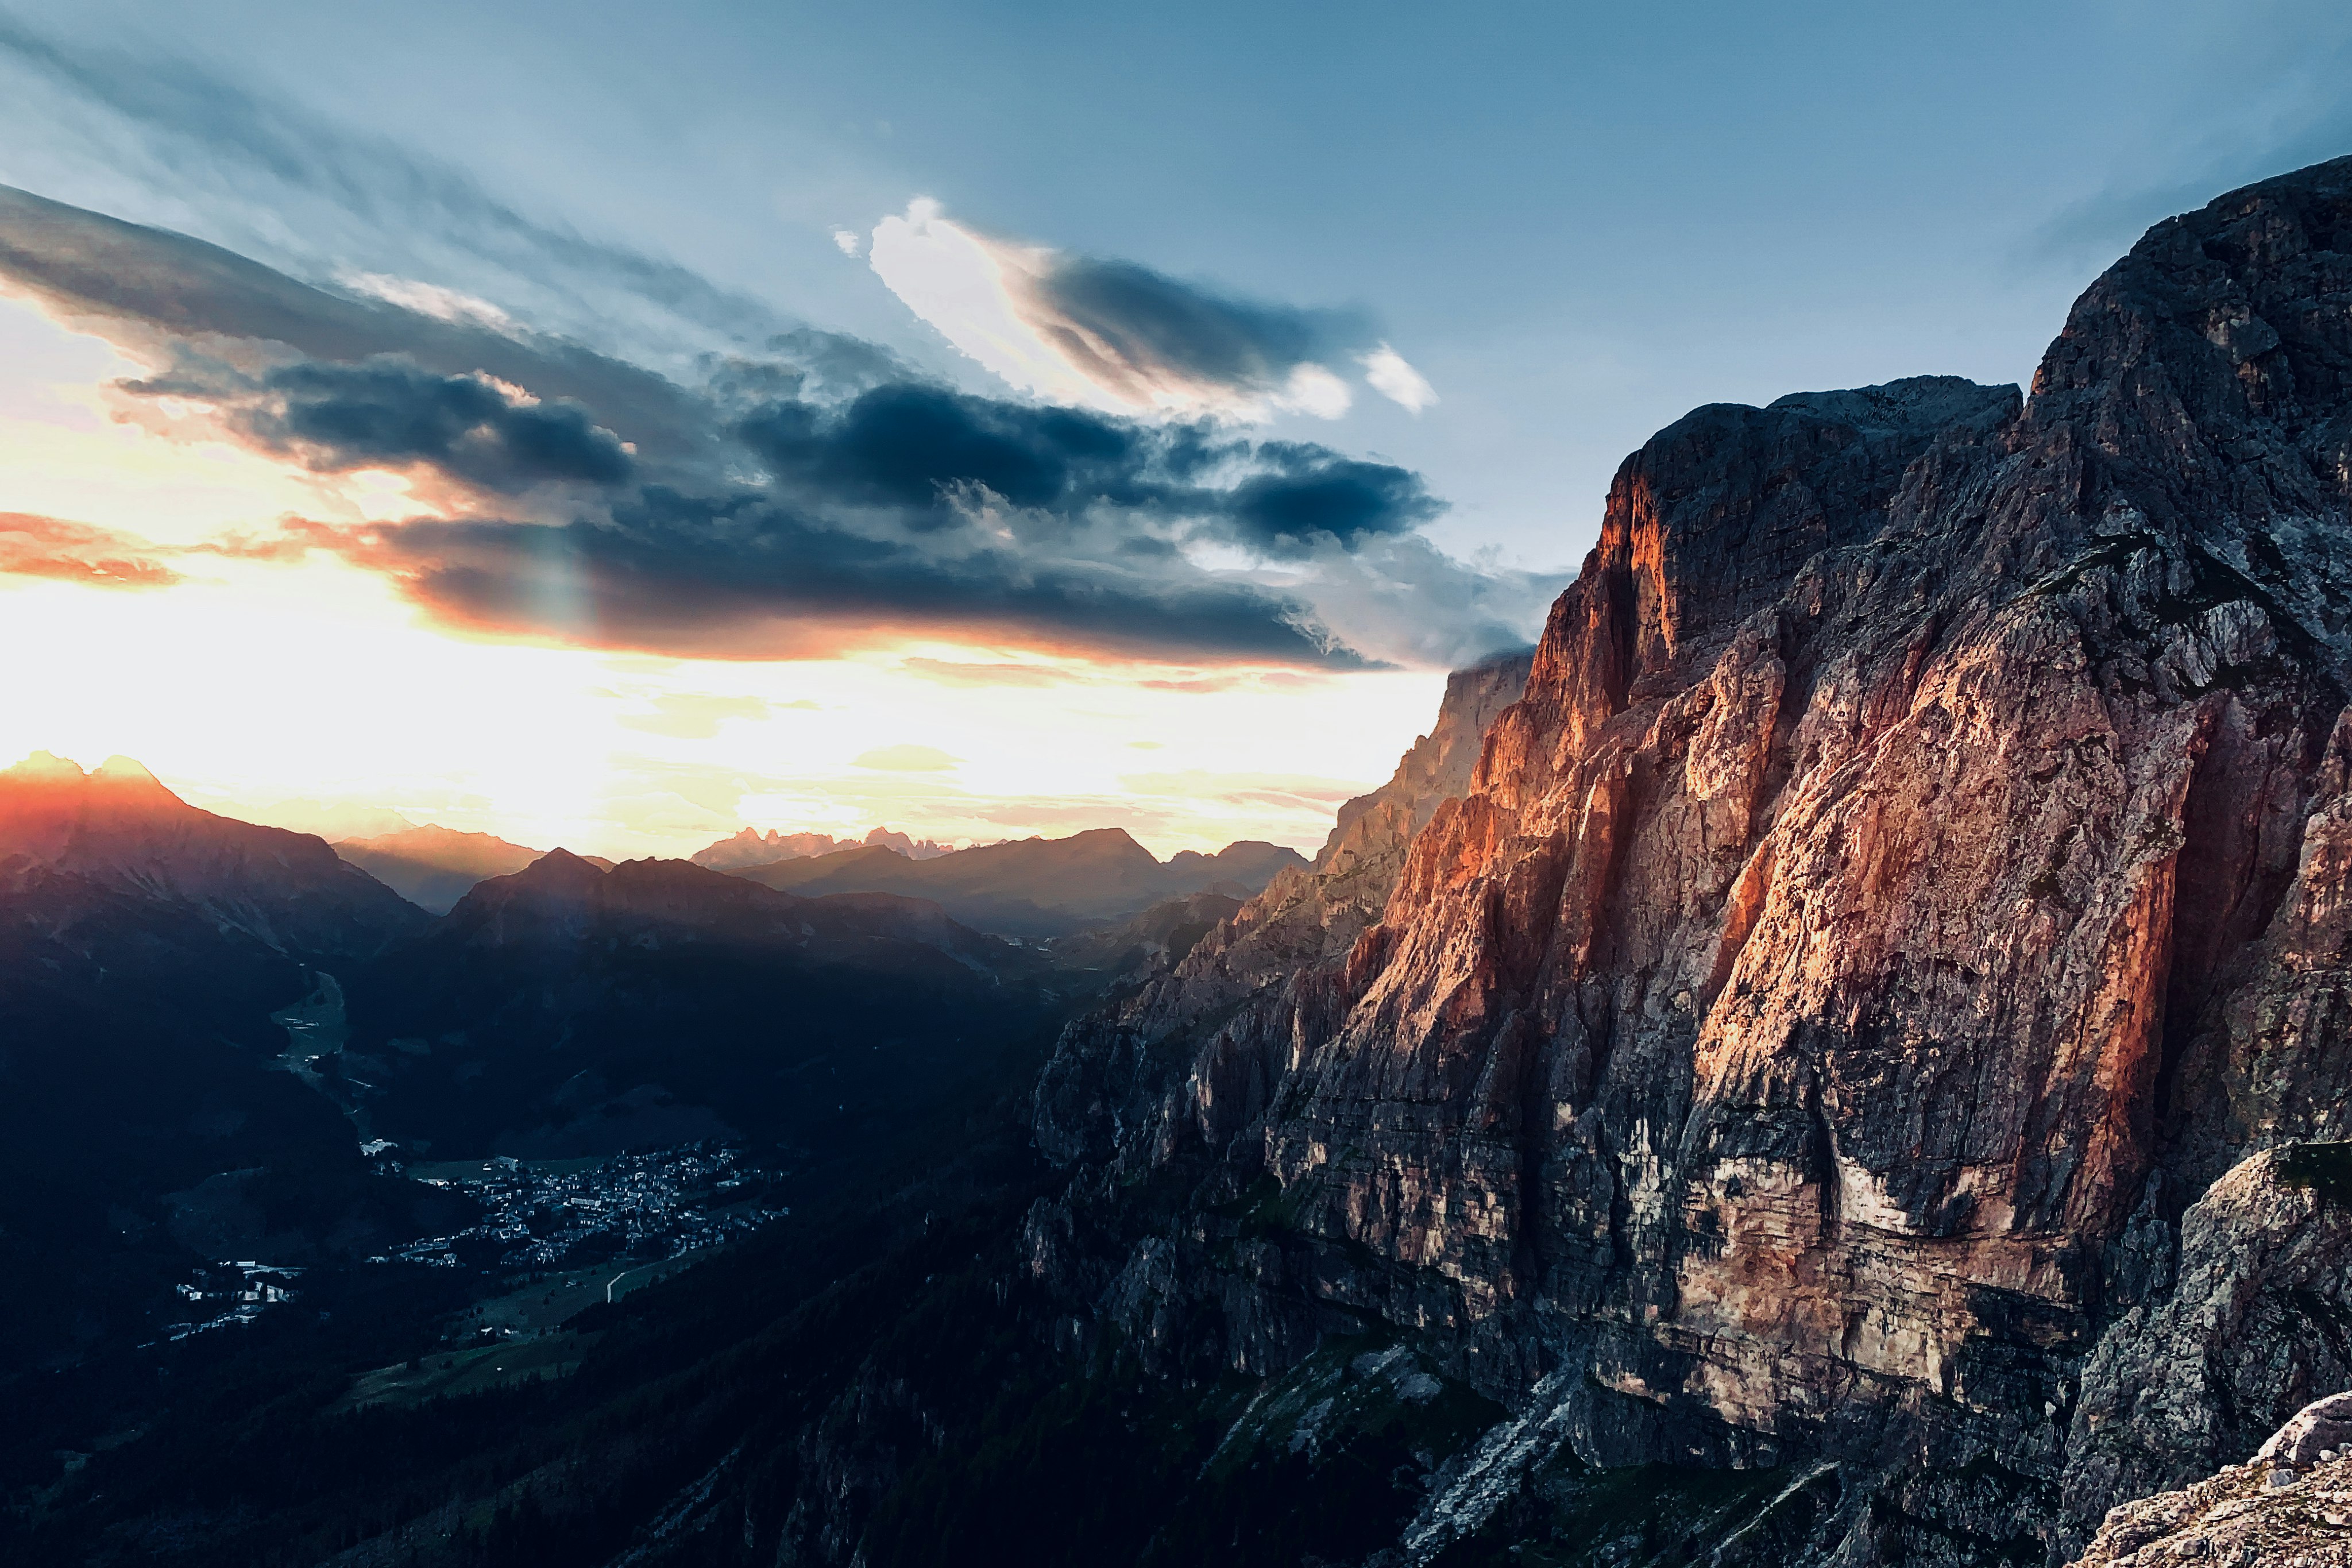 A sunset on the Dolomites